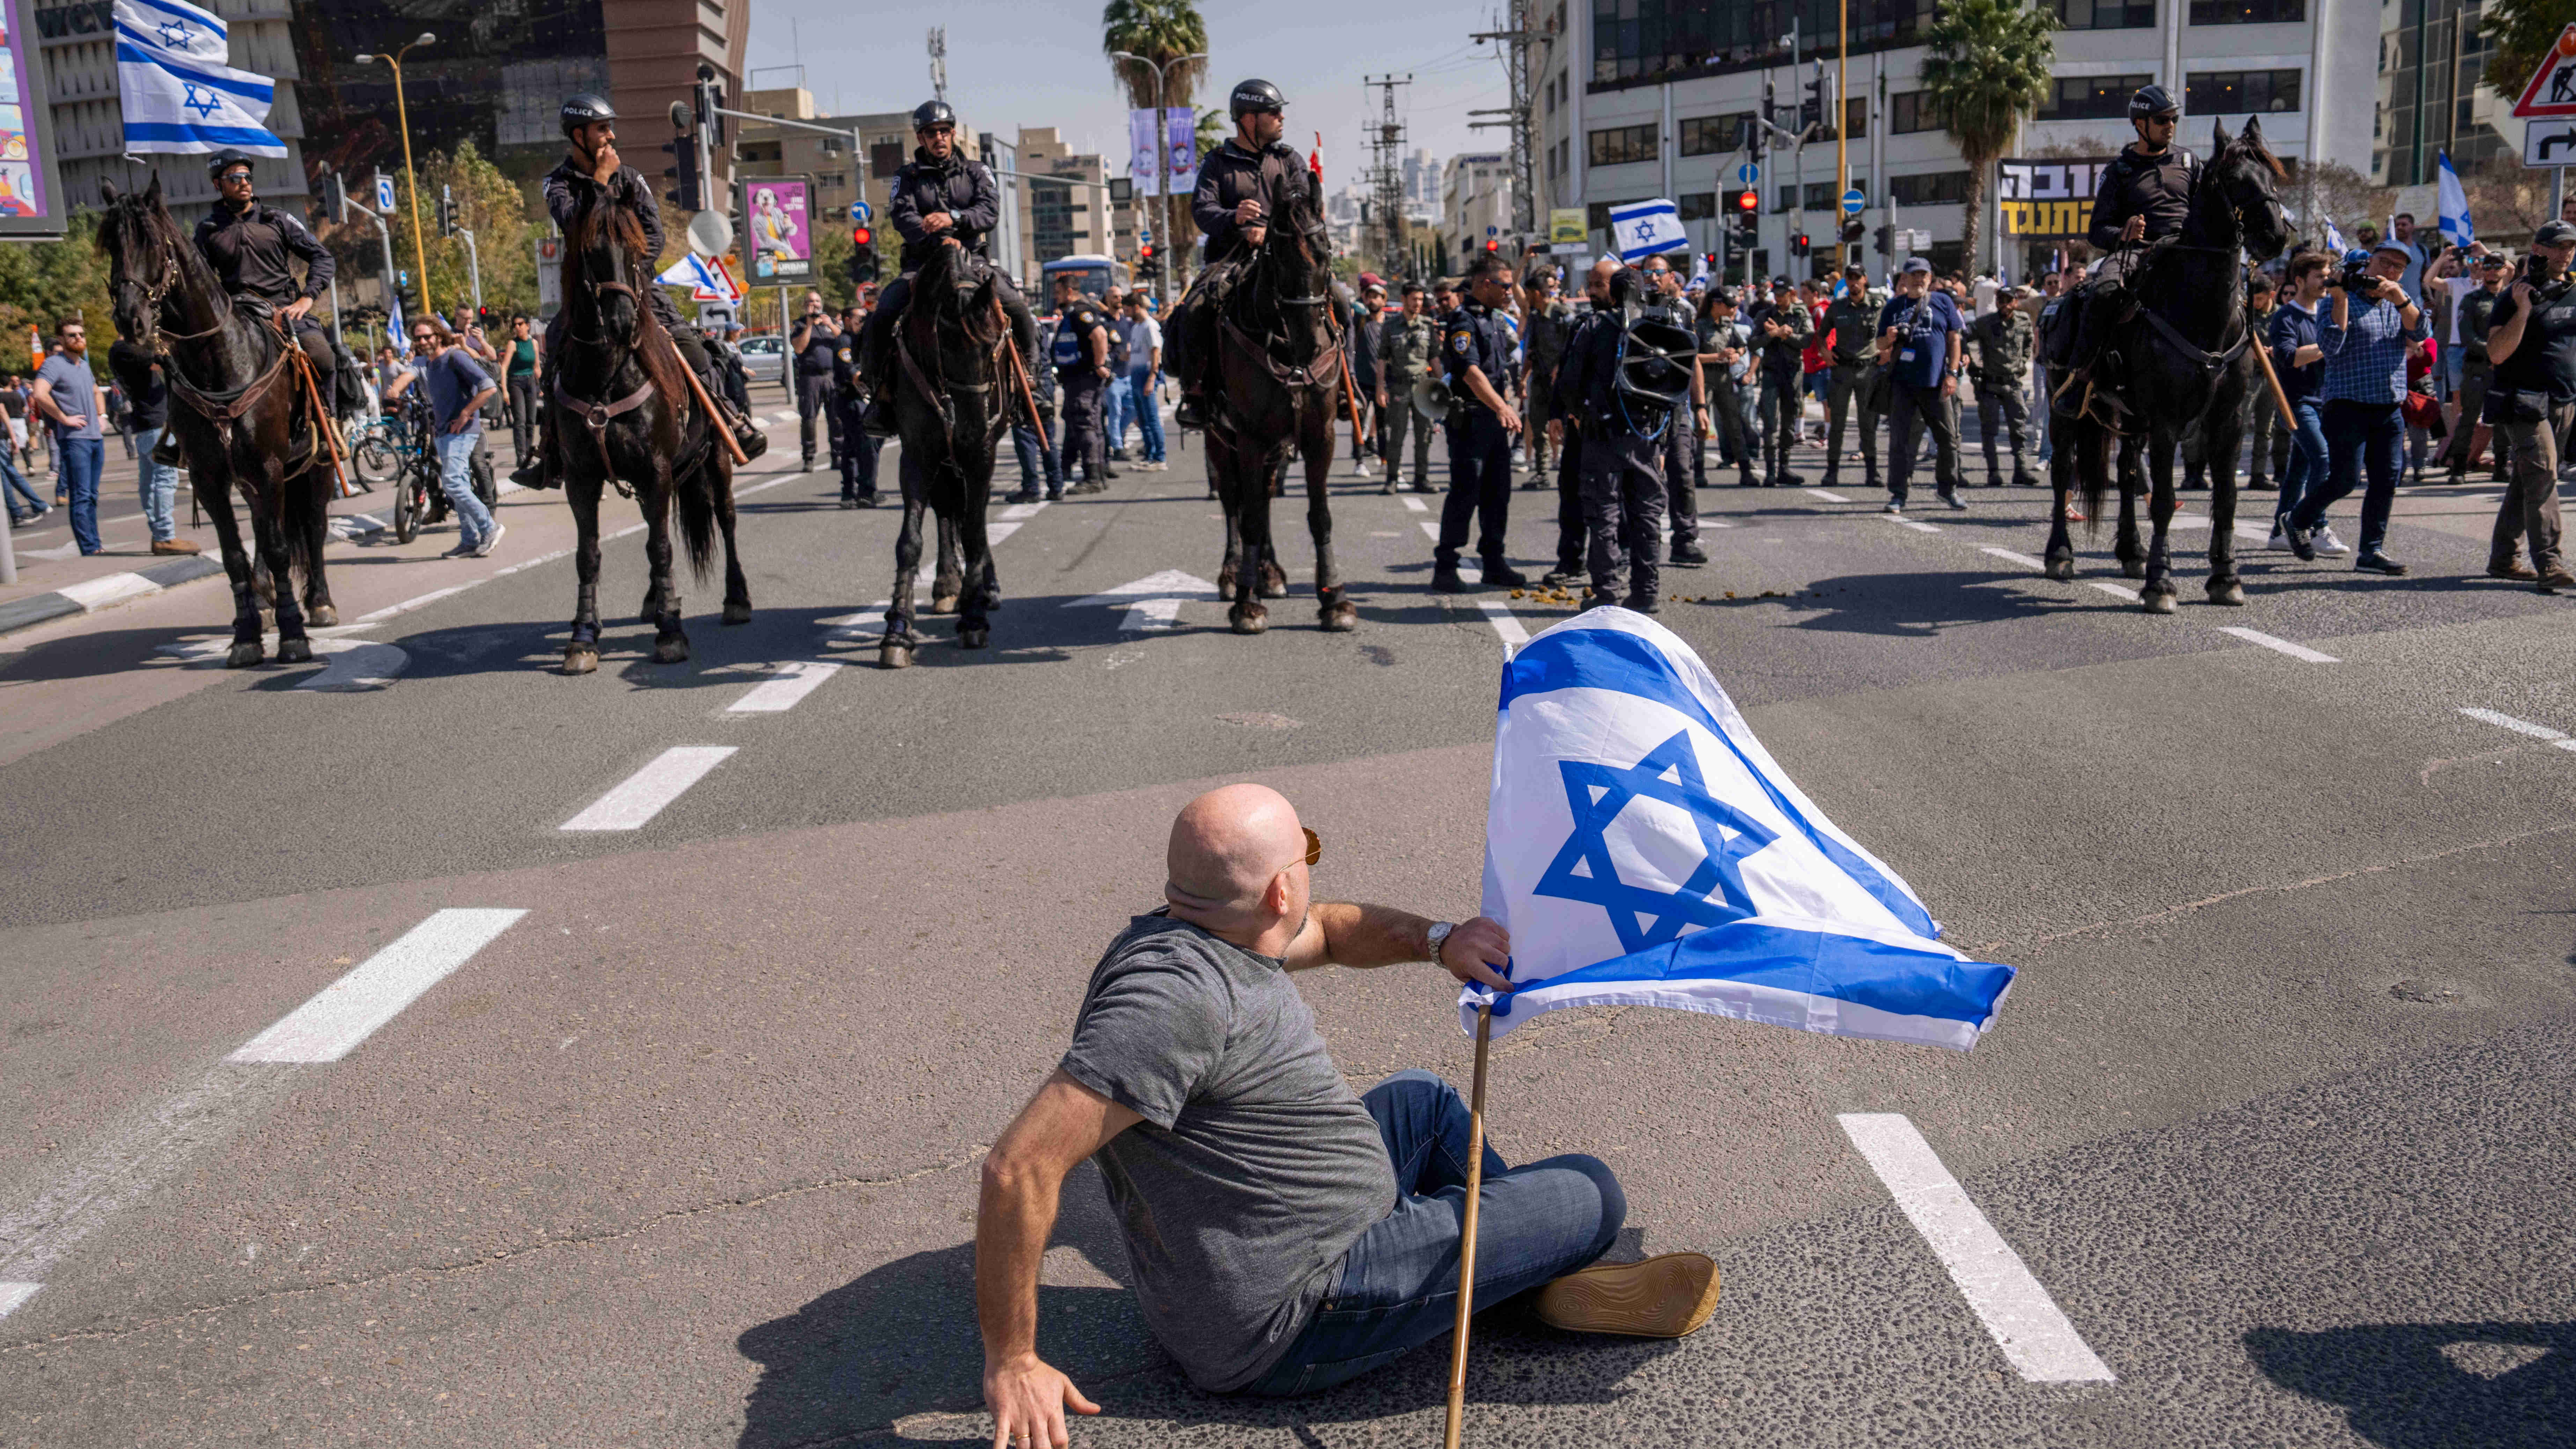 Mounted police are deployed as Israelis block a main road to protest the government's judicial overhaul plan in Tel Aviv on a March 2023 (AP)